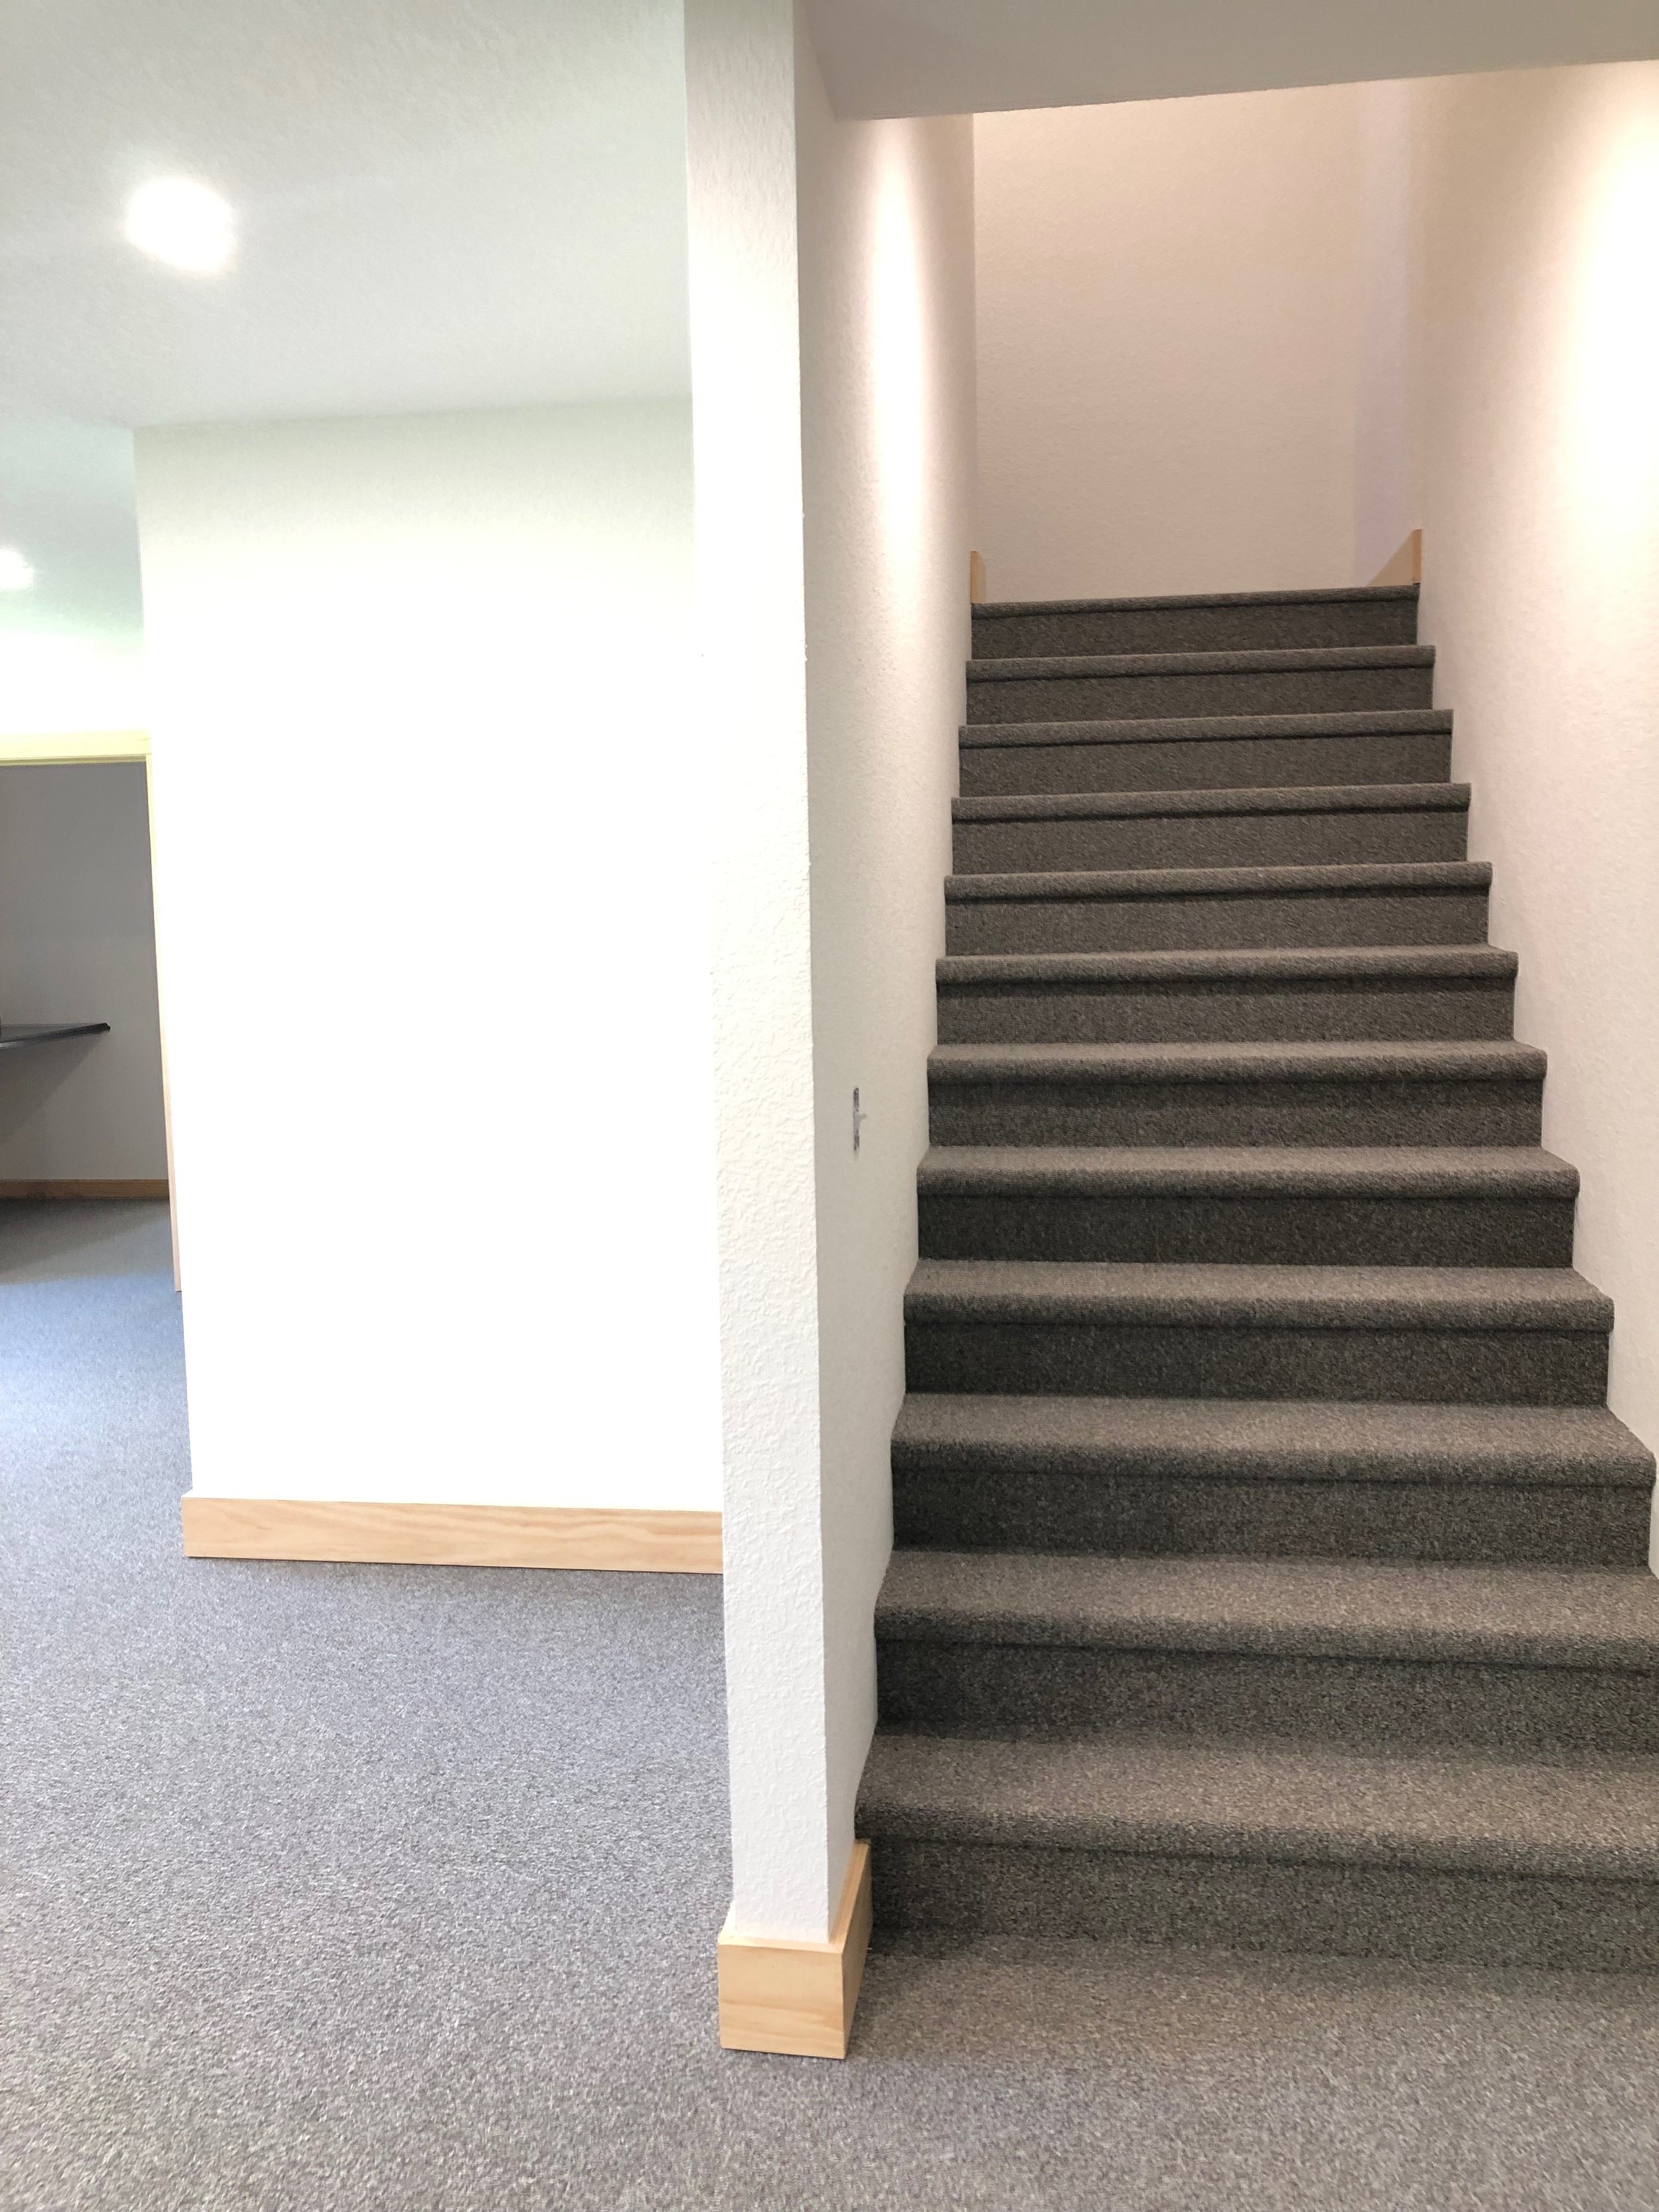 Carpet in stairwell